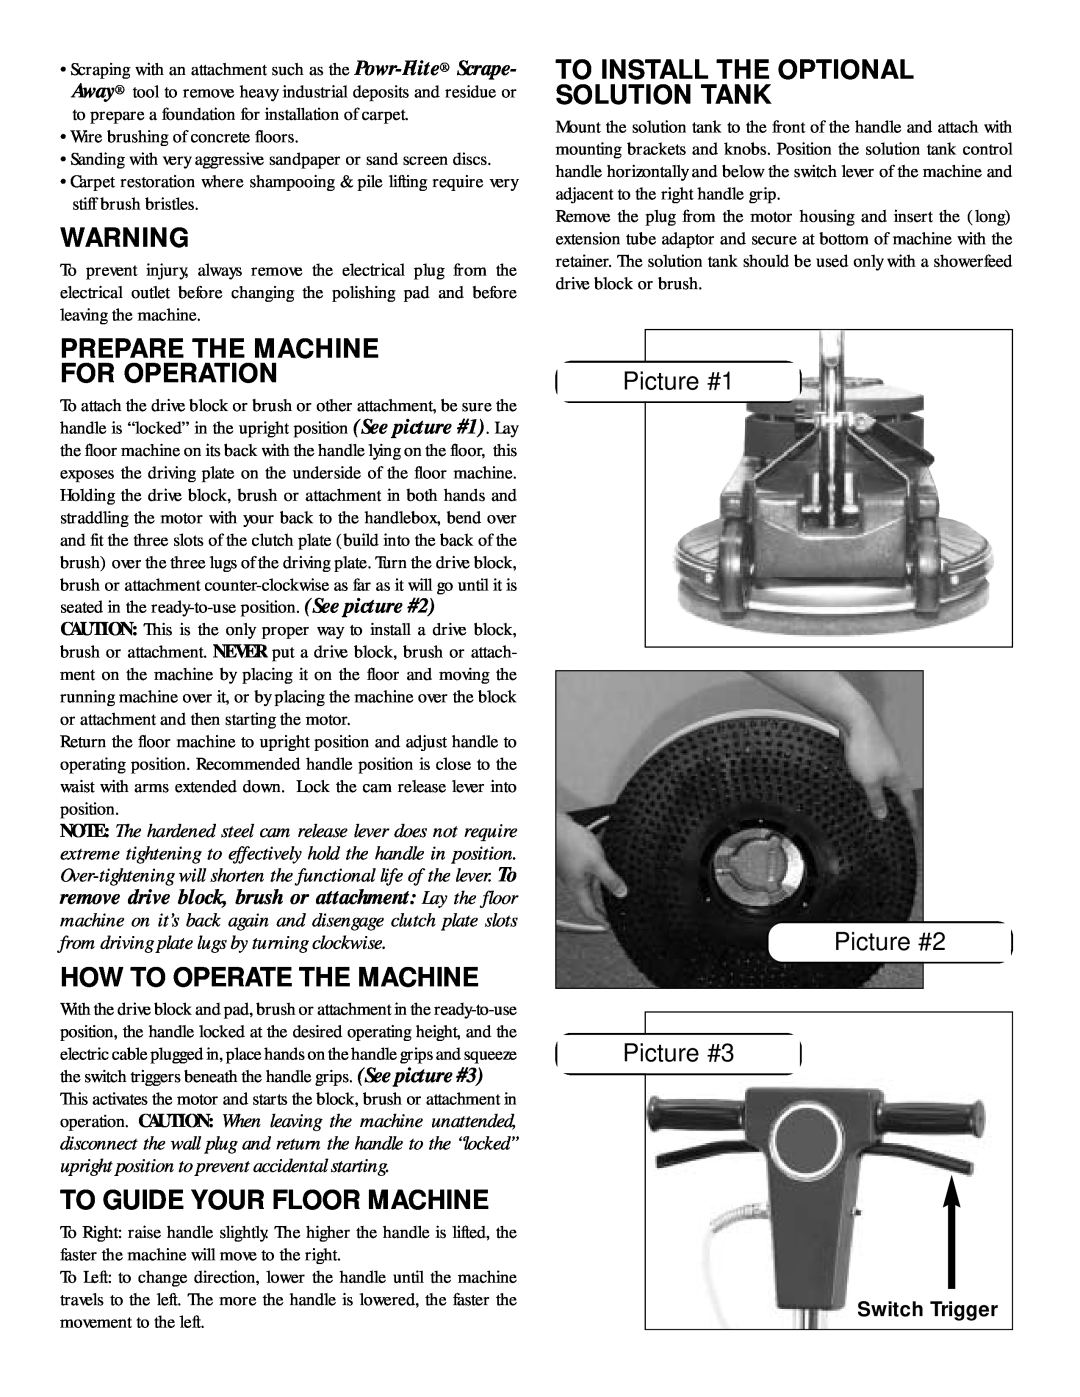 Addtron Technology P201 manual Prepare The Machine For Operation, How To Operate The Machine, To Guide Your Floor Machine 